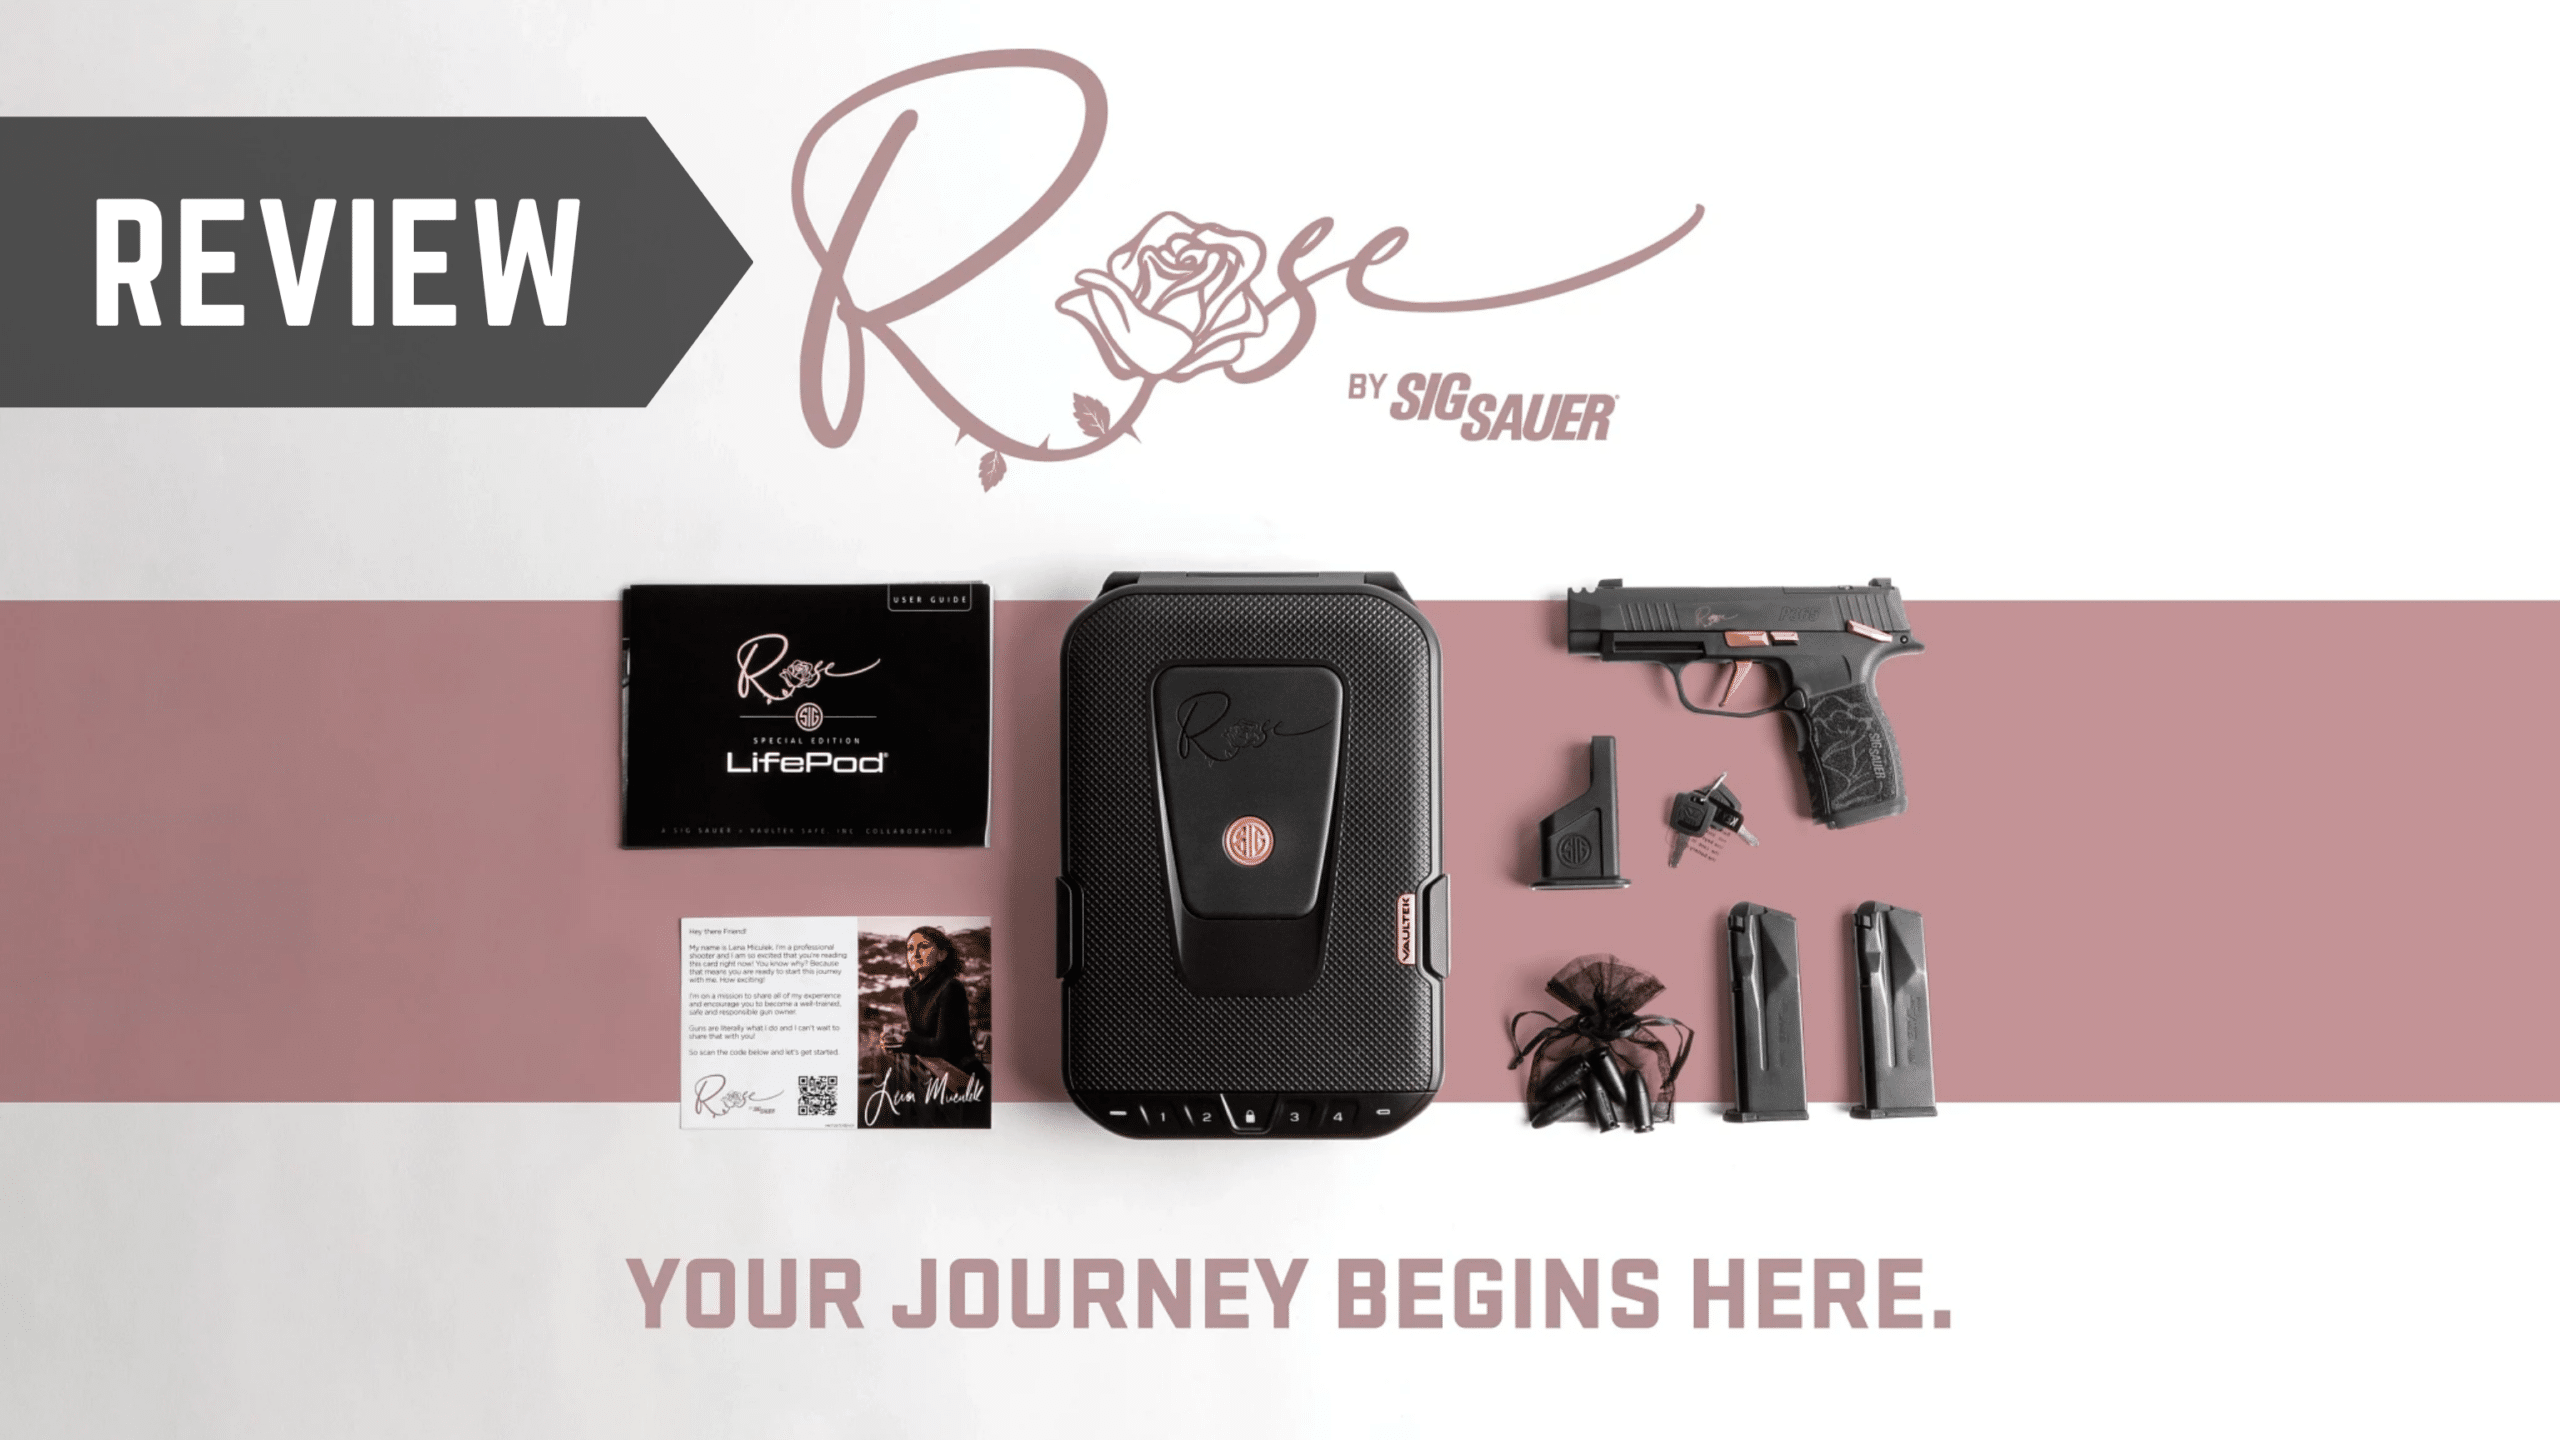 The Rose brand of Sig Sauer products was created to help encourage and inspire women to take on the responsibility of their own personal safety through education, training, and community.